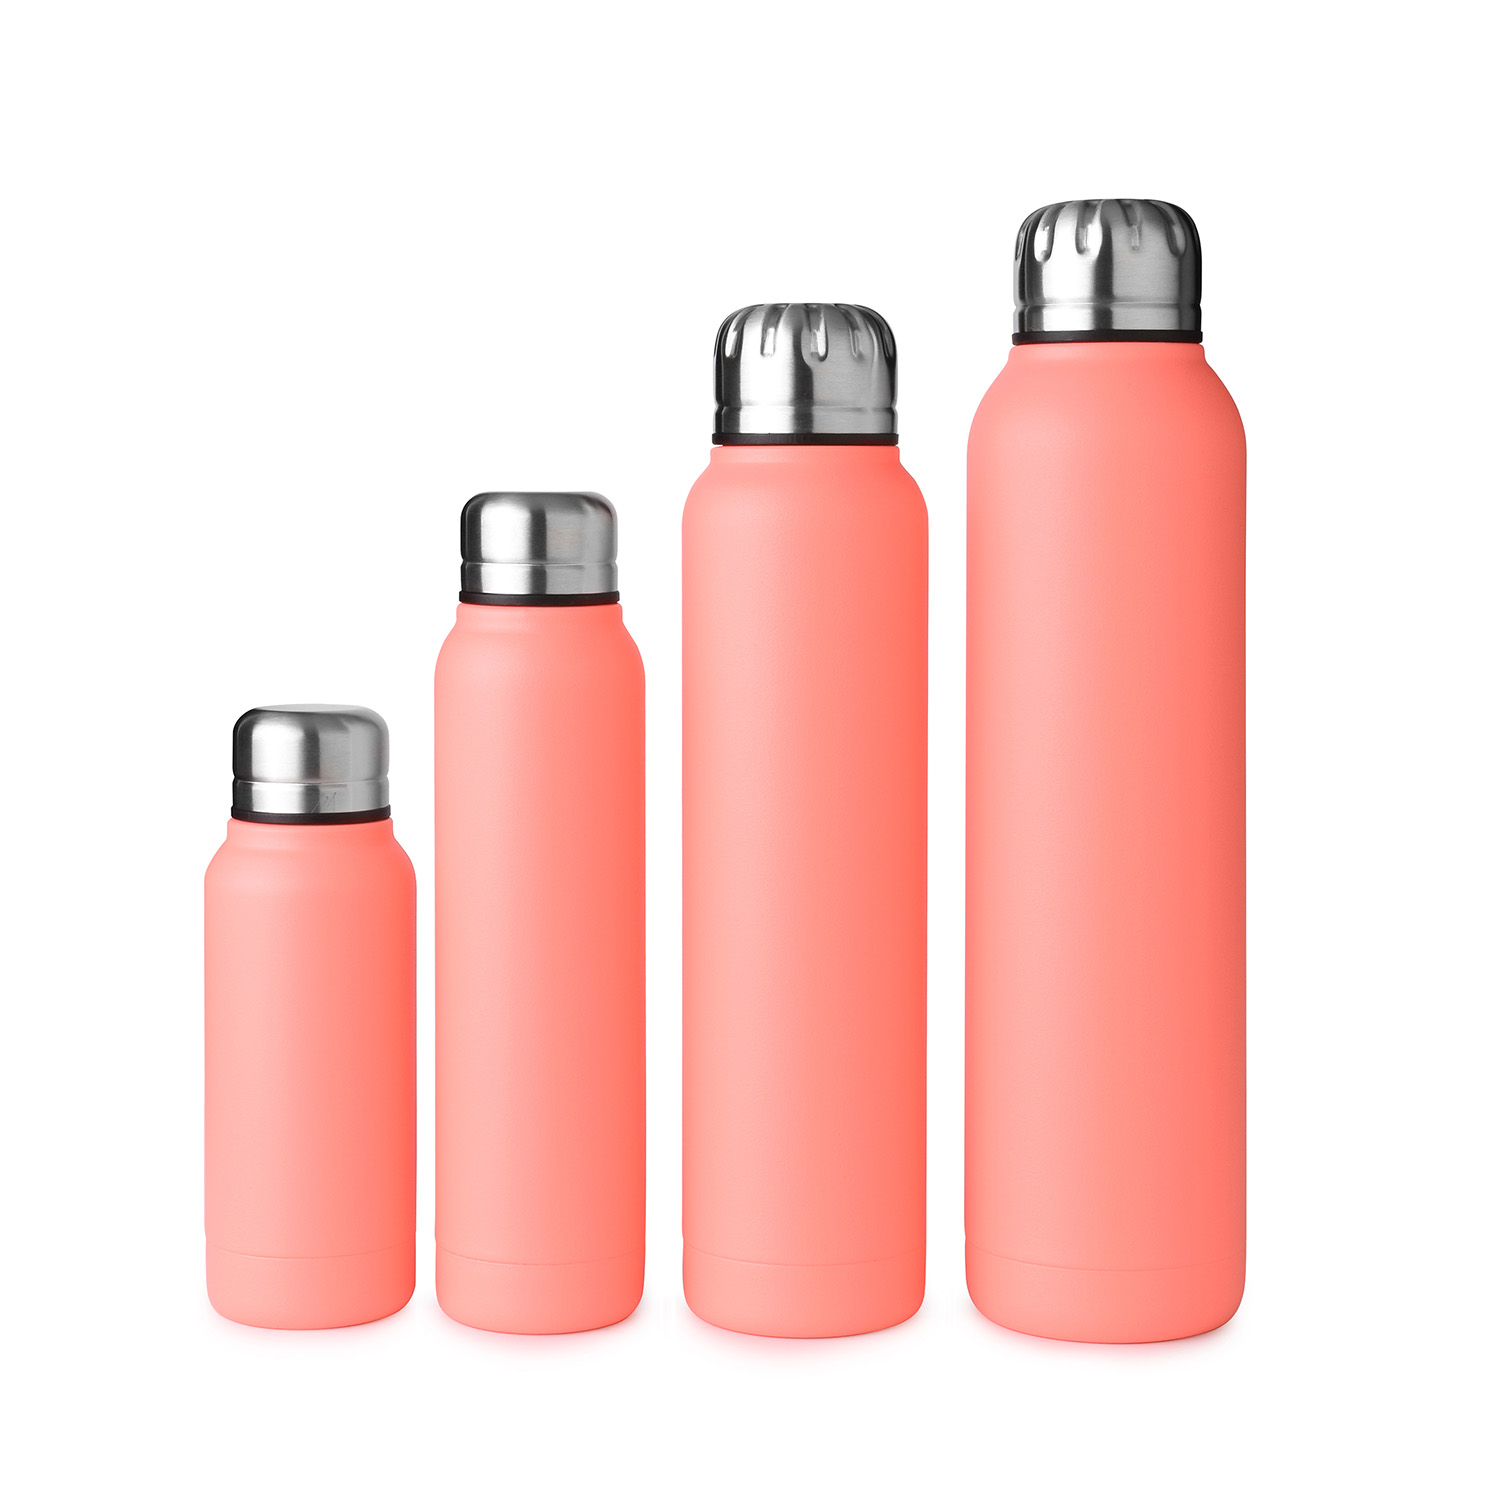 Insulated Stainless Steel Slim Drink Bottle Best Corporate Gift 160ml